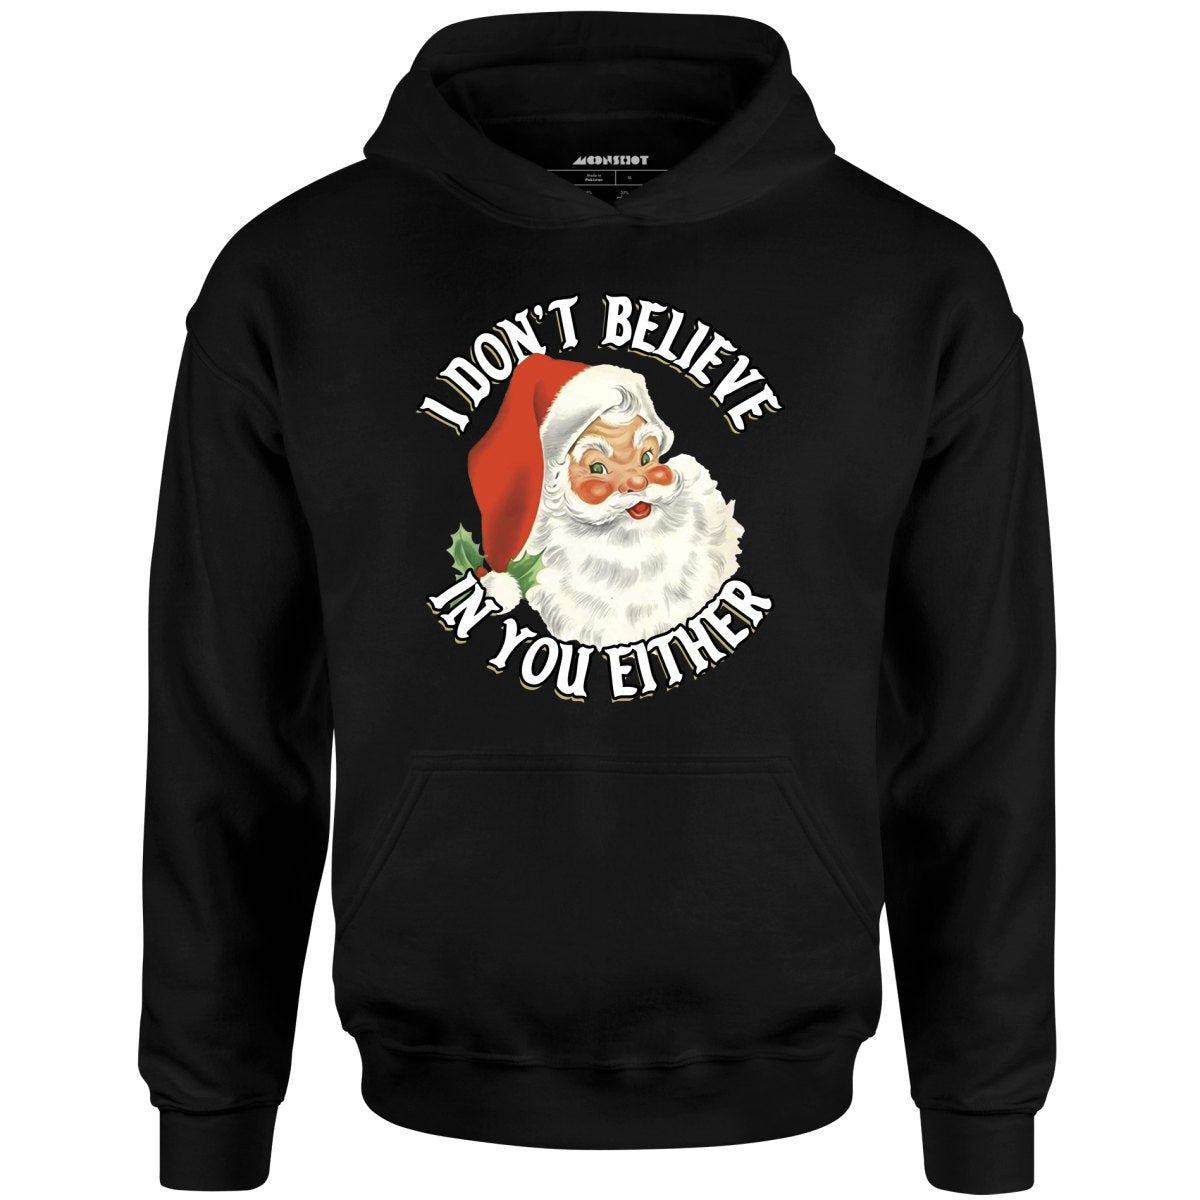 I Don't Believe in You Either - Unisex Hoodie